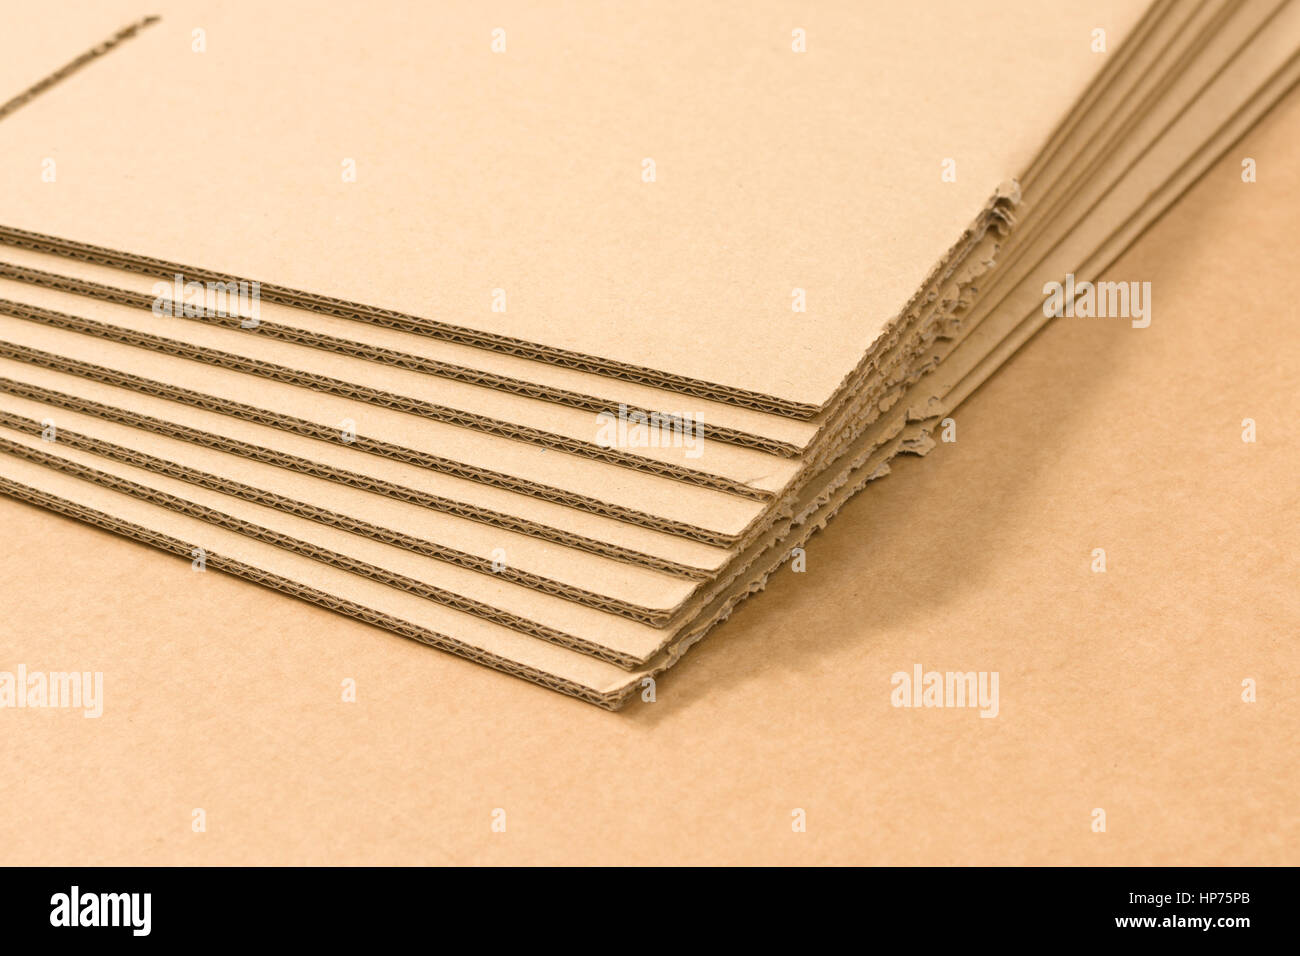 Industrial flat pack single wall cardboard boxes or cartons Stock Photo -  Alamy